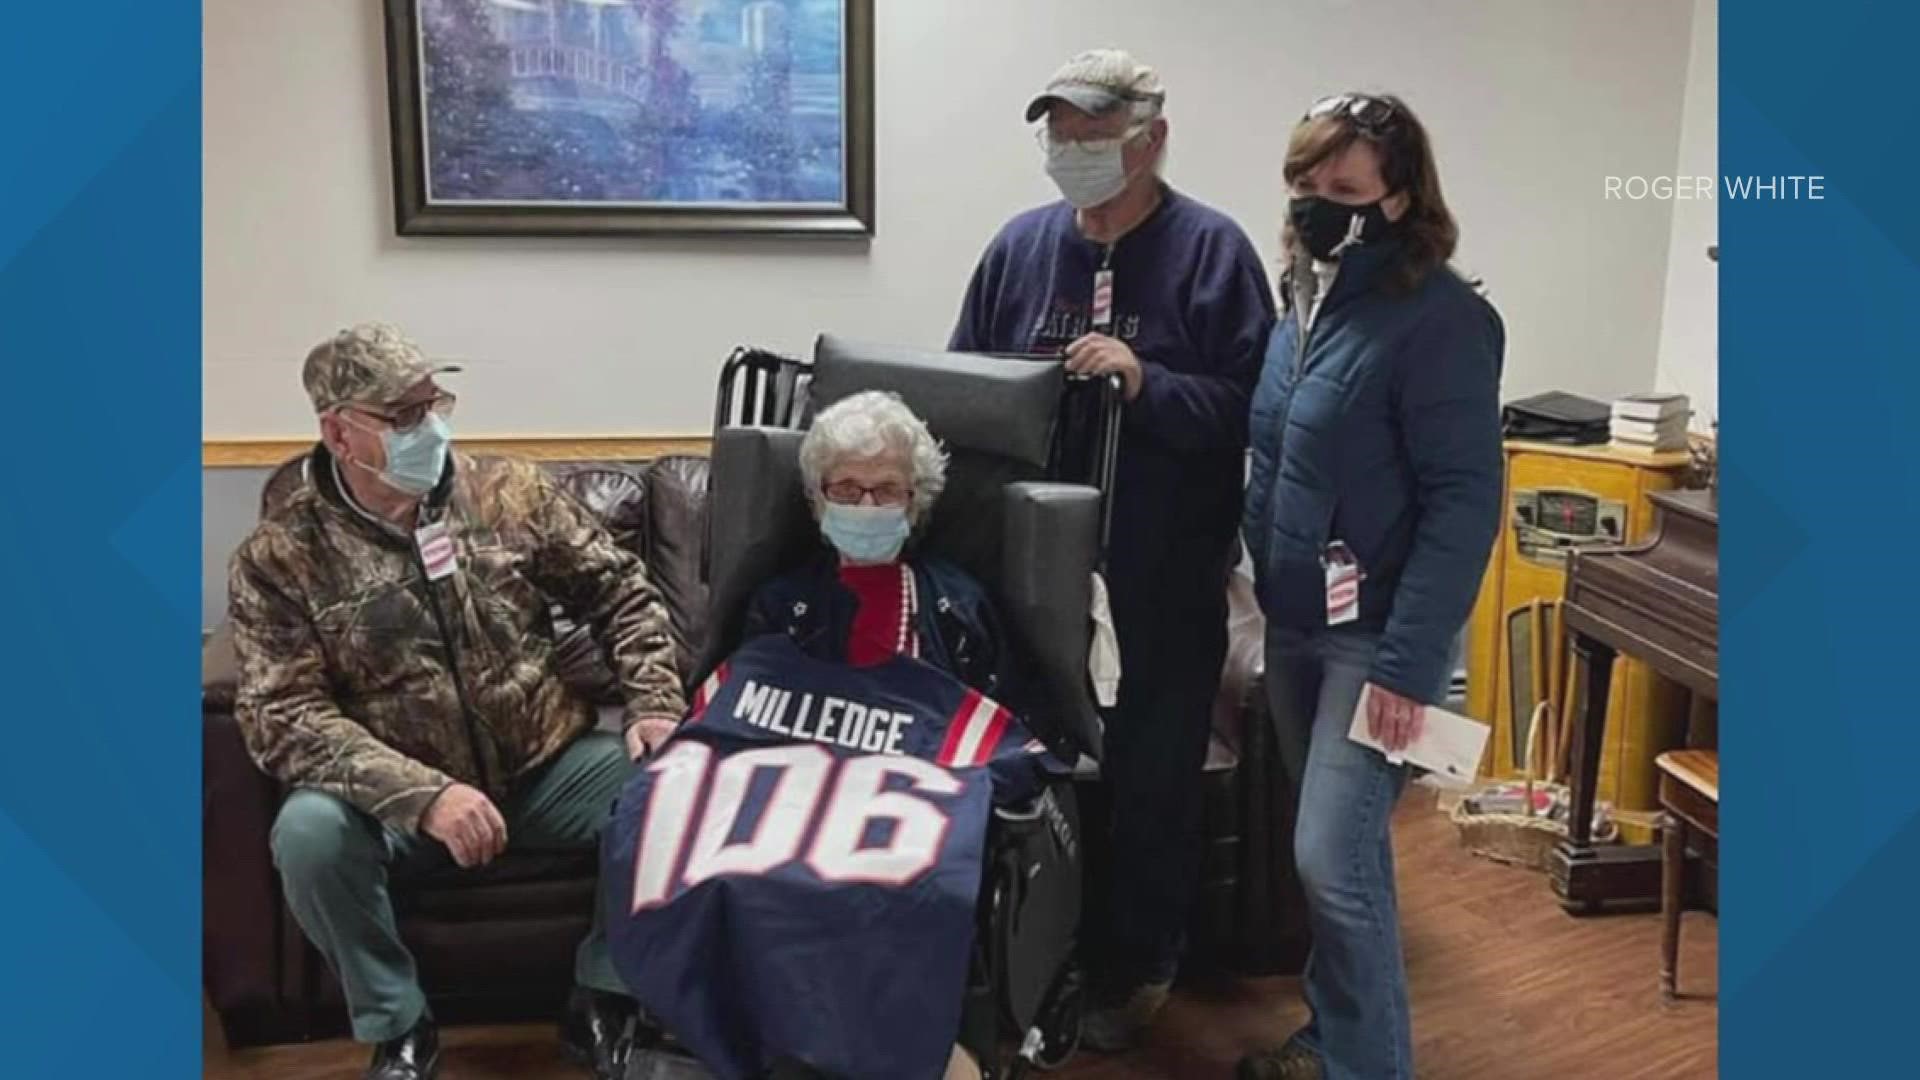 Myrtle Milledge of Rumford is 106, and she's a devoted Patriots fan.